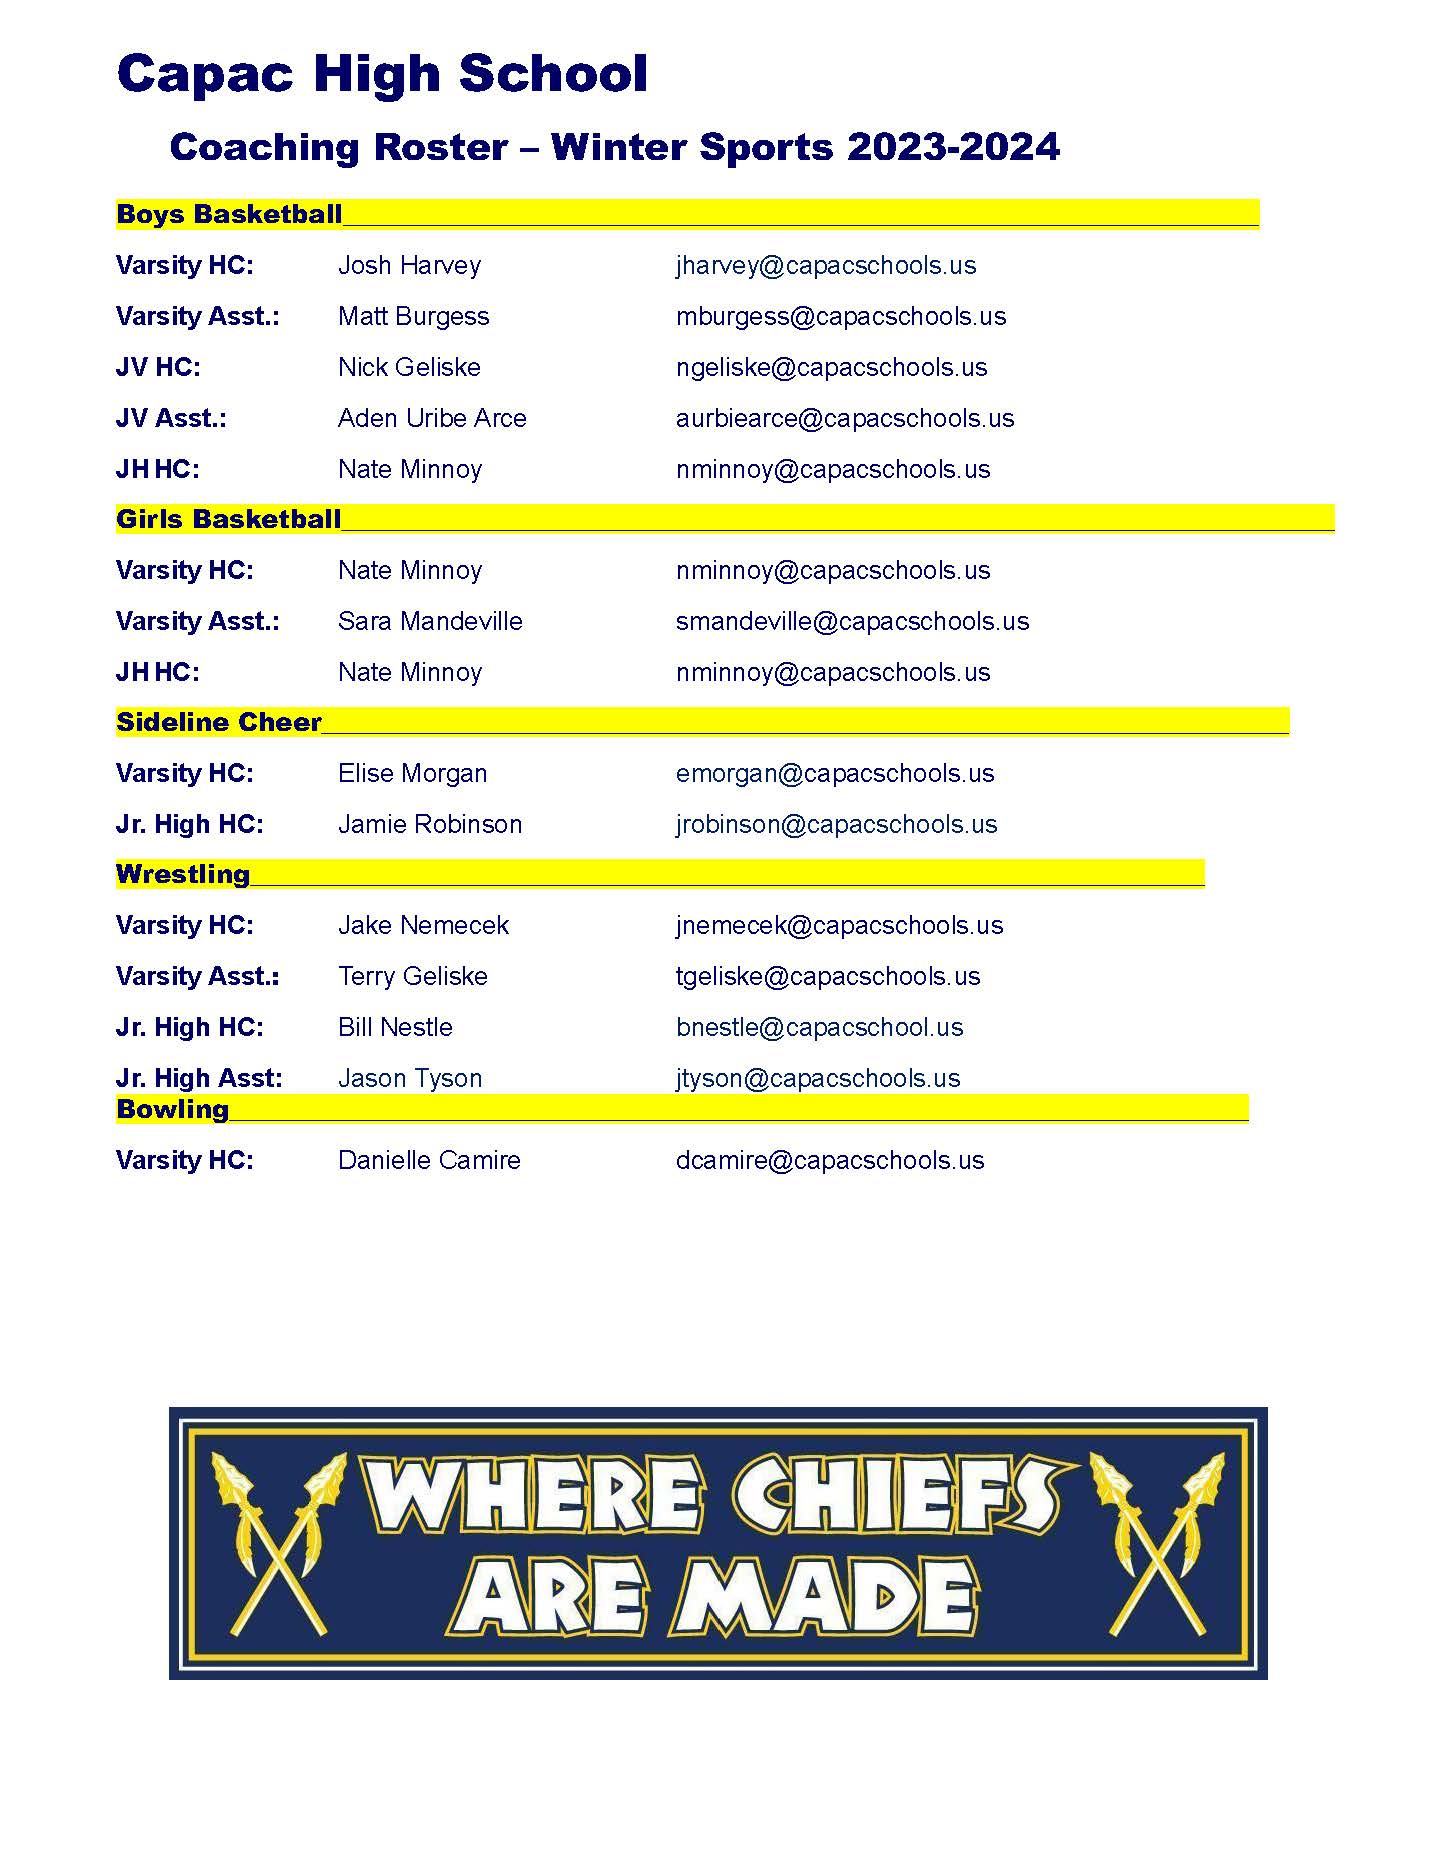 winter coaches roster 23/24